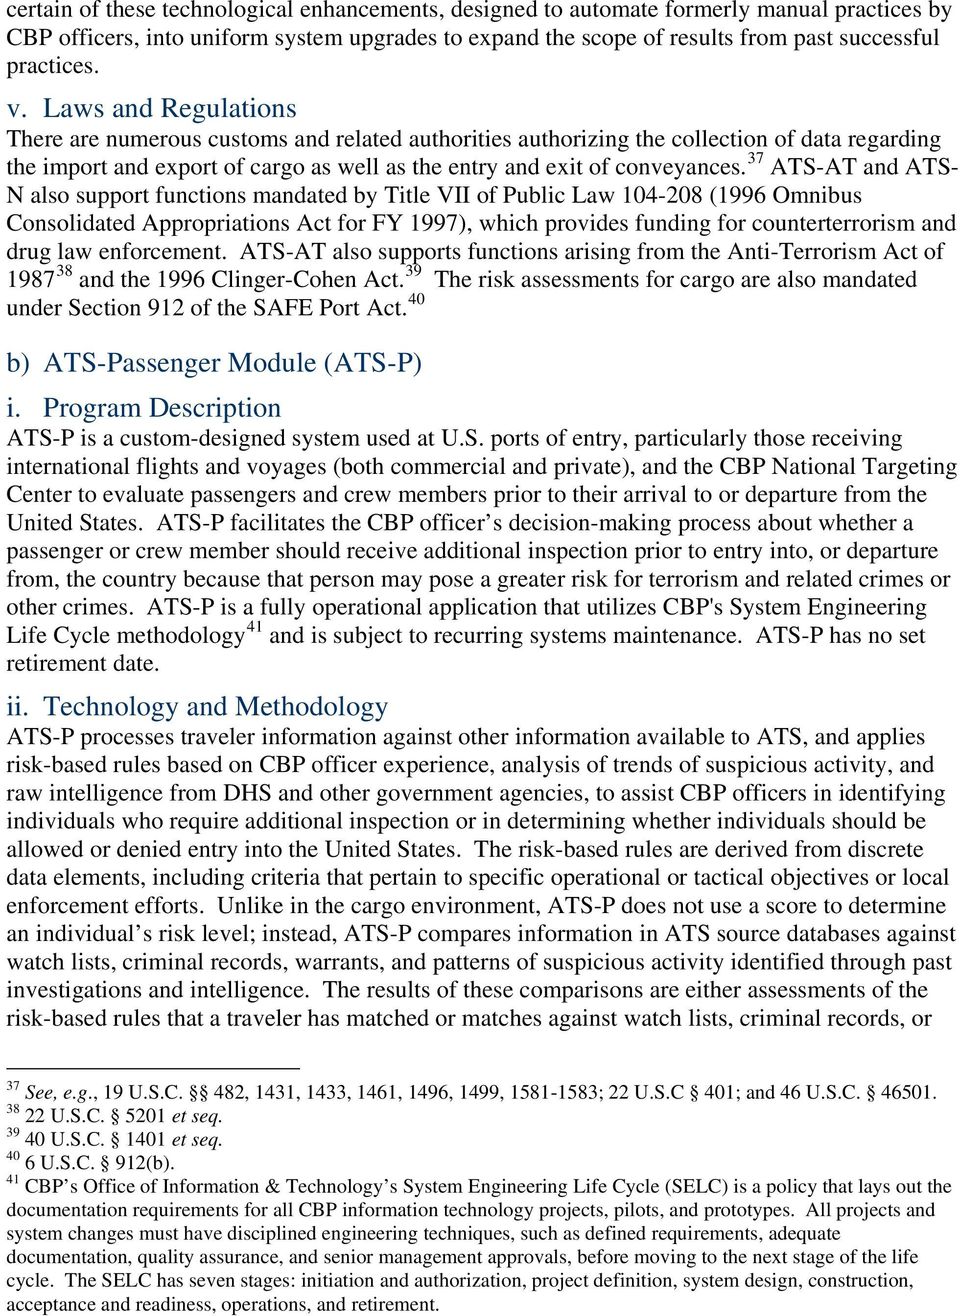 37 ATS-AT and ATS- N also support functions mandated by Title VII of Public Law 104-208 (1996 Omnibus Consolidated Appropriations Act for FY 1997), which provides funding for counterterrorism and